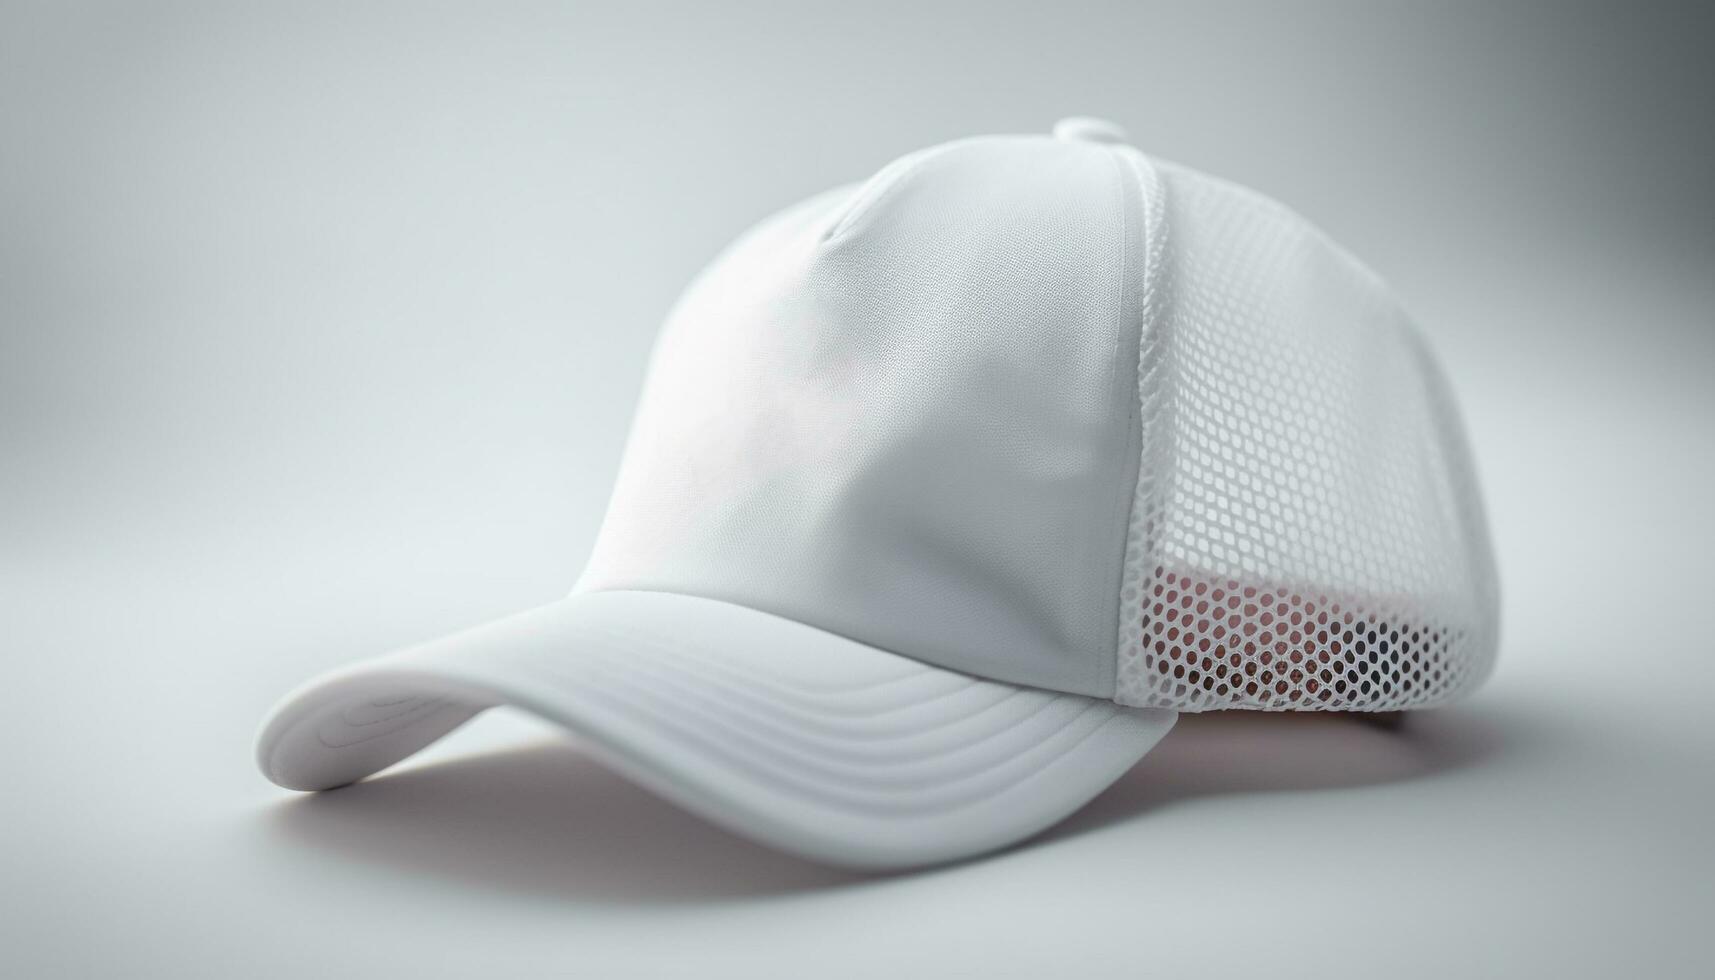 Blue baseball cap on white background, symbol of sports industry generated by AI photo